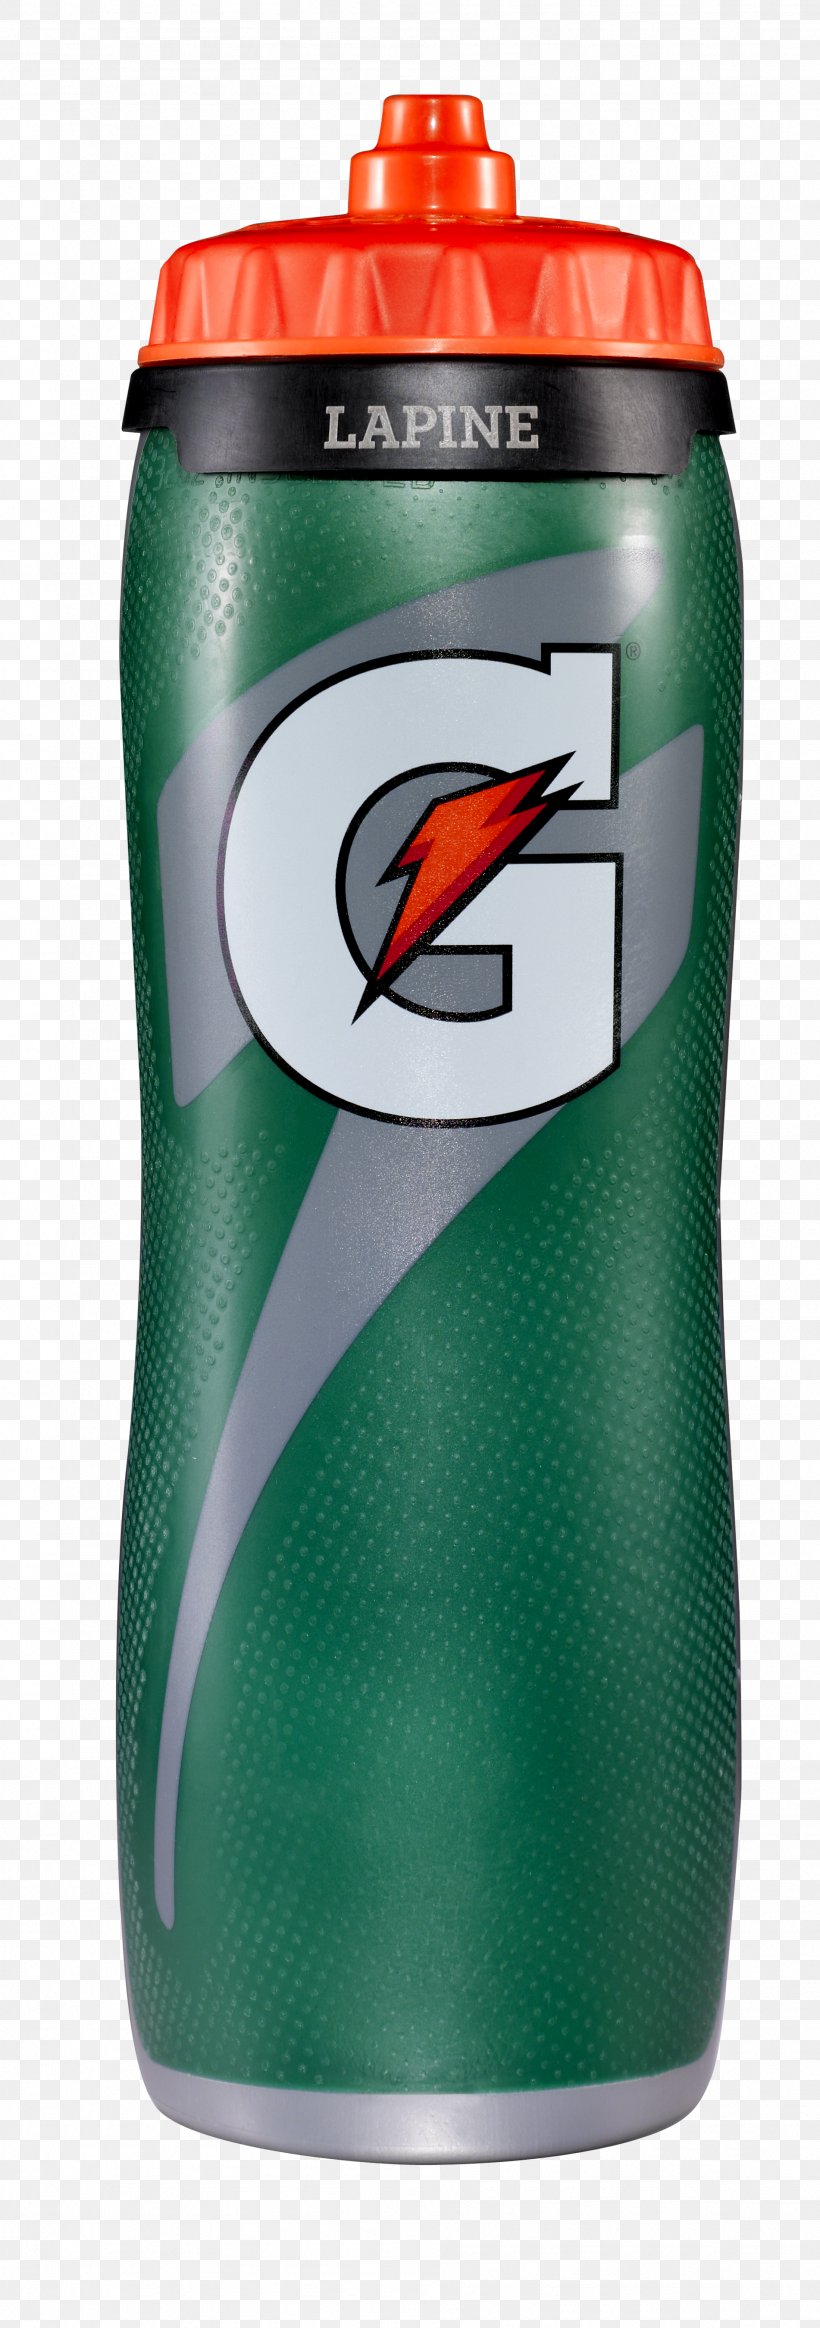 Water Bottles The Gatorade Company Drink, PNG, 1902x5400px, Water Bottles, Beverage Can, Bottle, Drink, Drinkware Download Free